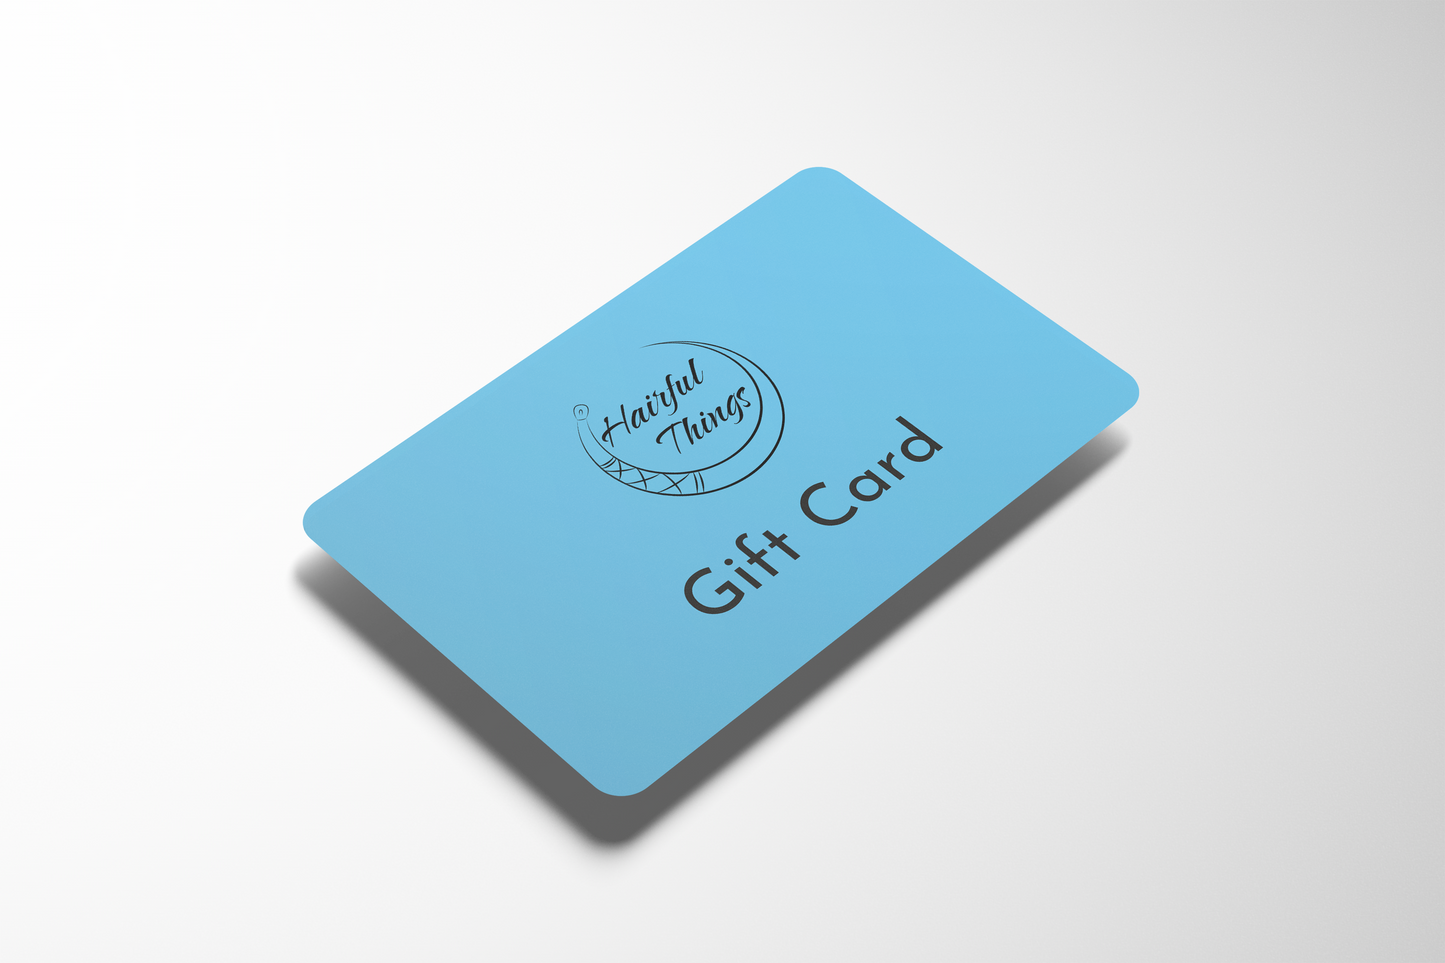 $50 USD Gift Card